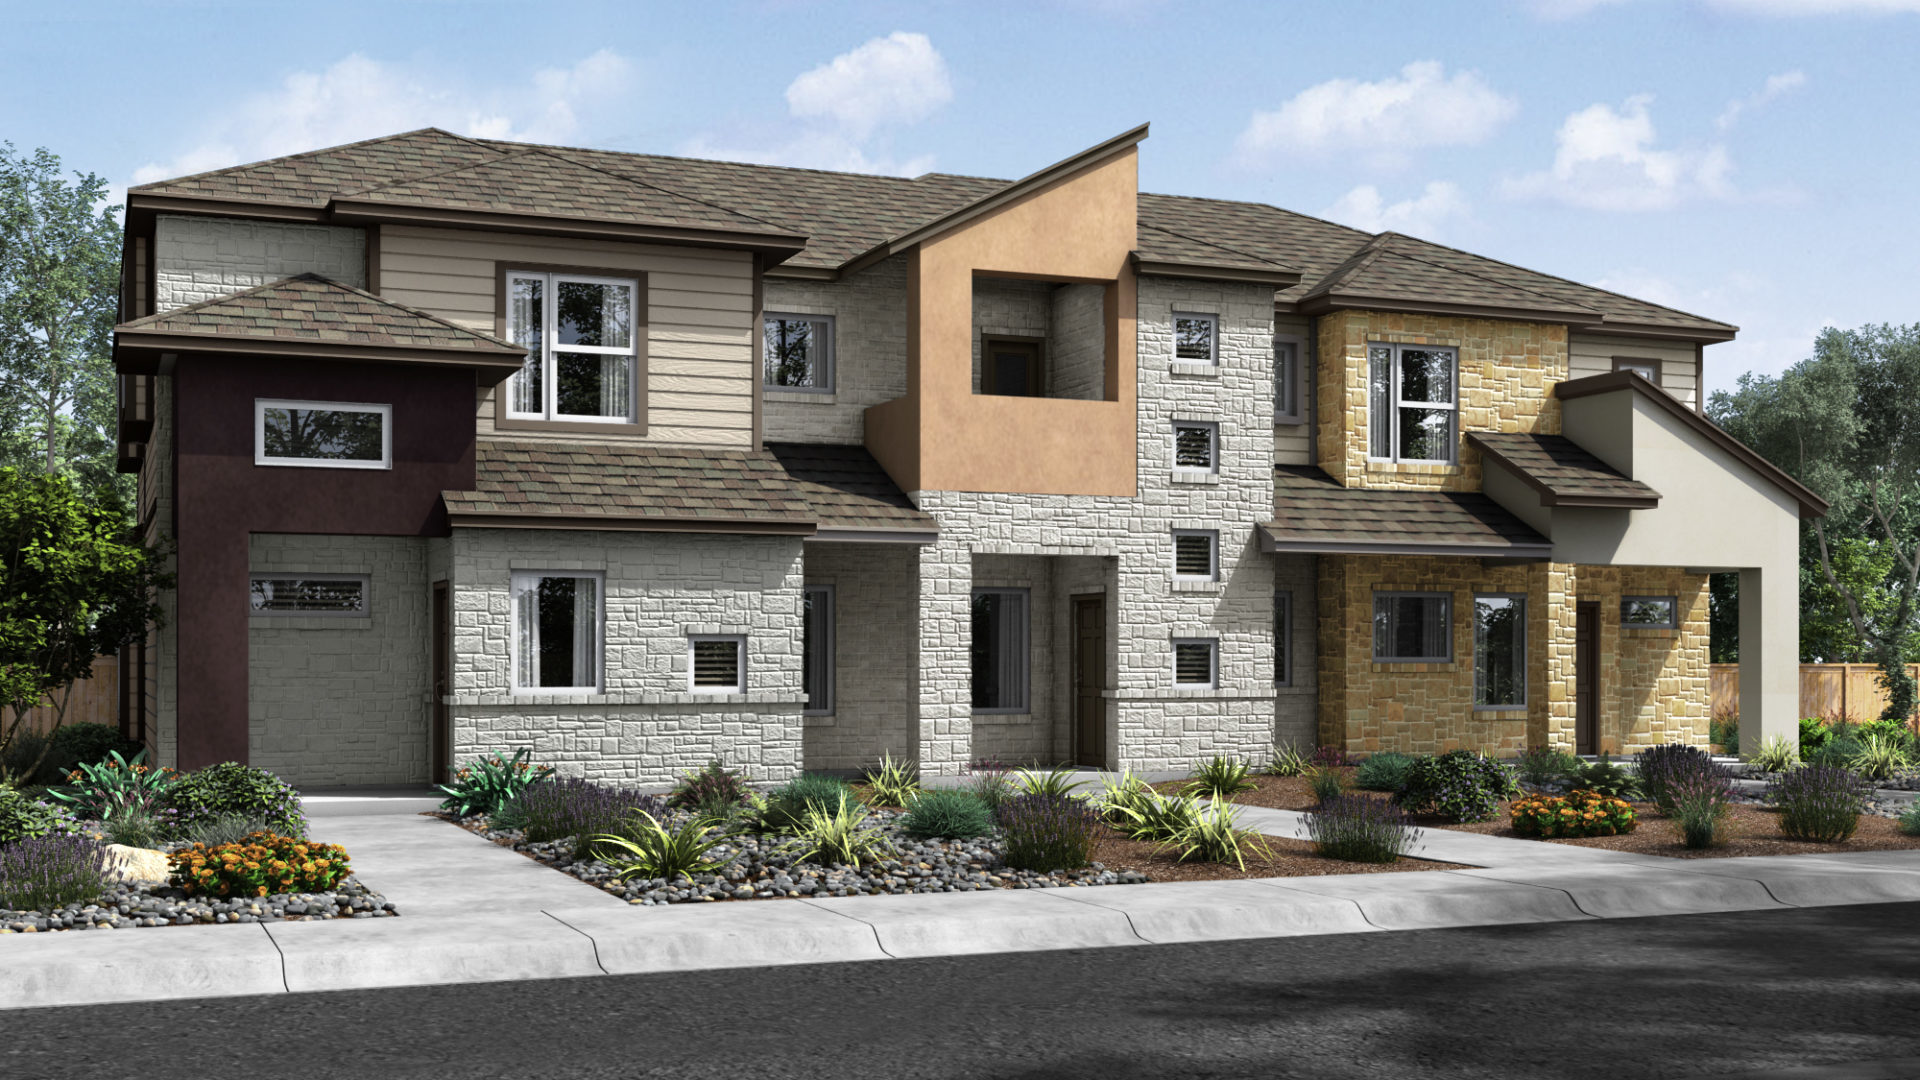 The Emo - The Parrish - The Moody Duplex Whisper Valley New Homes in Manor